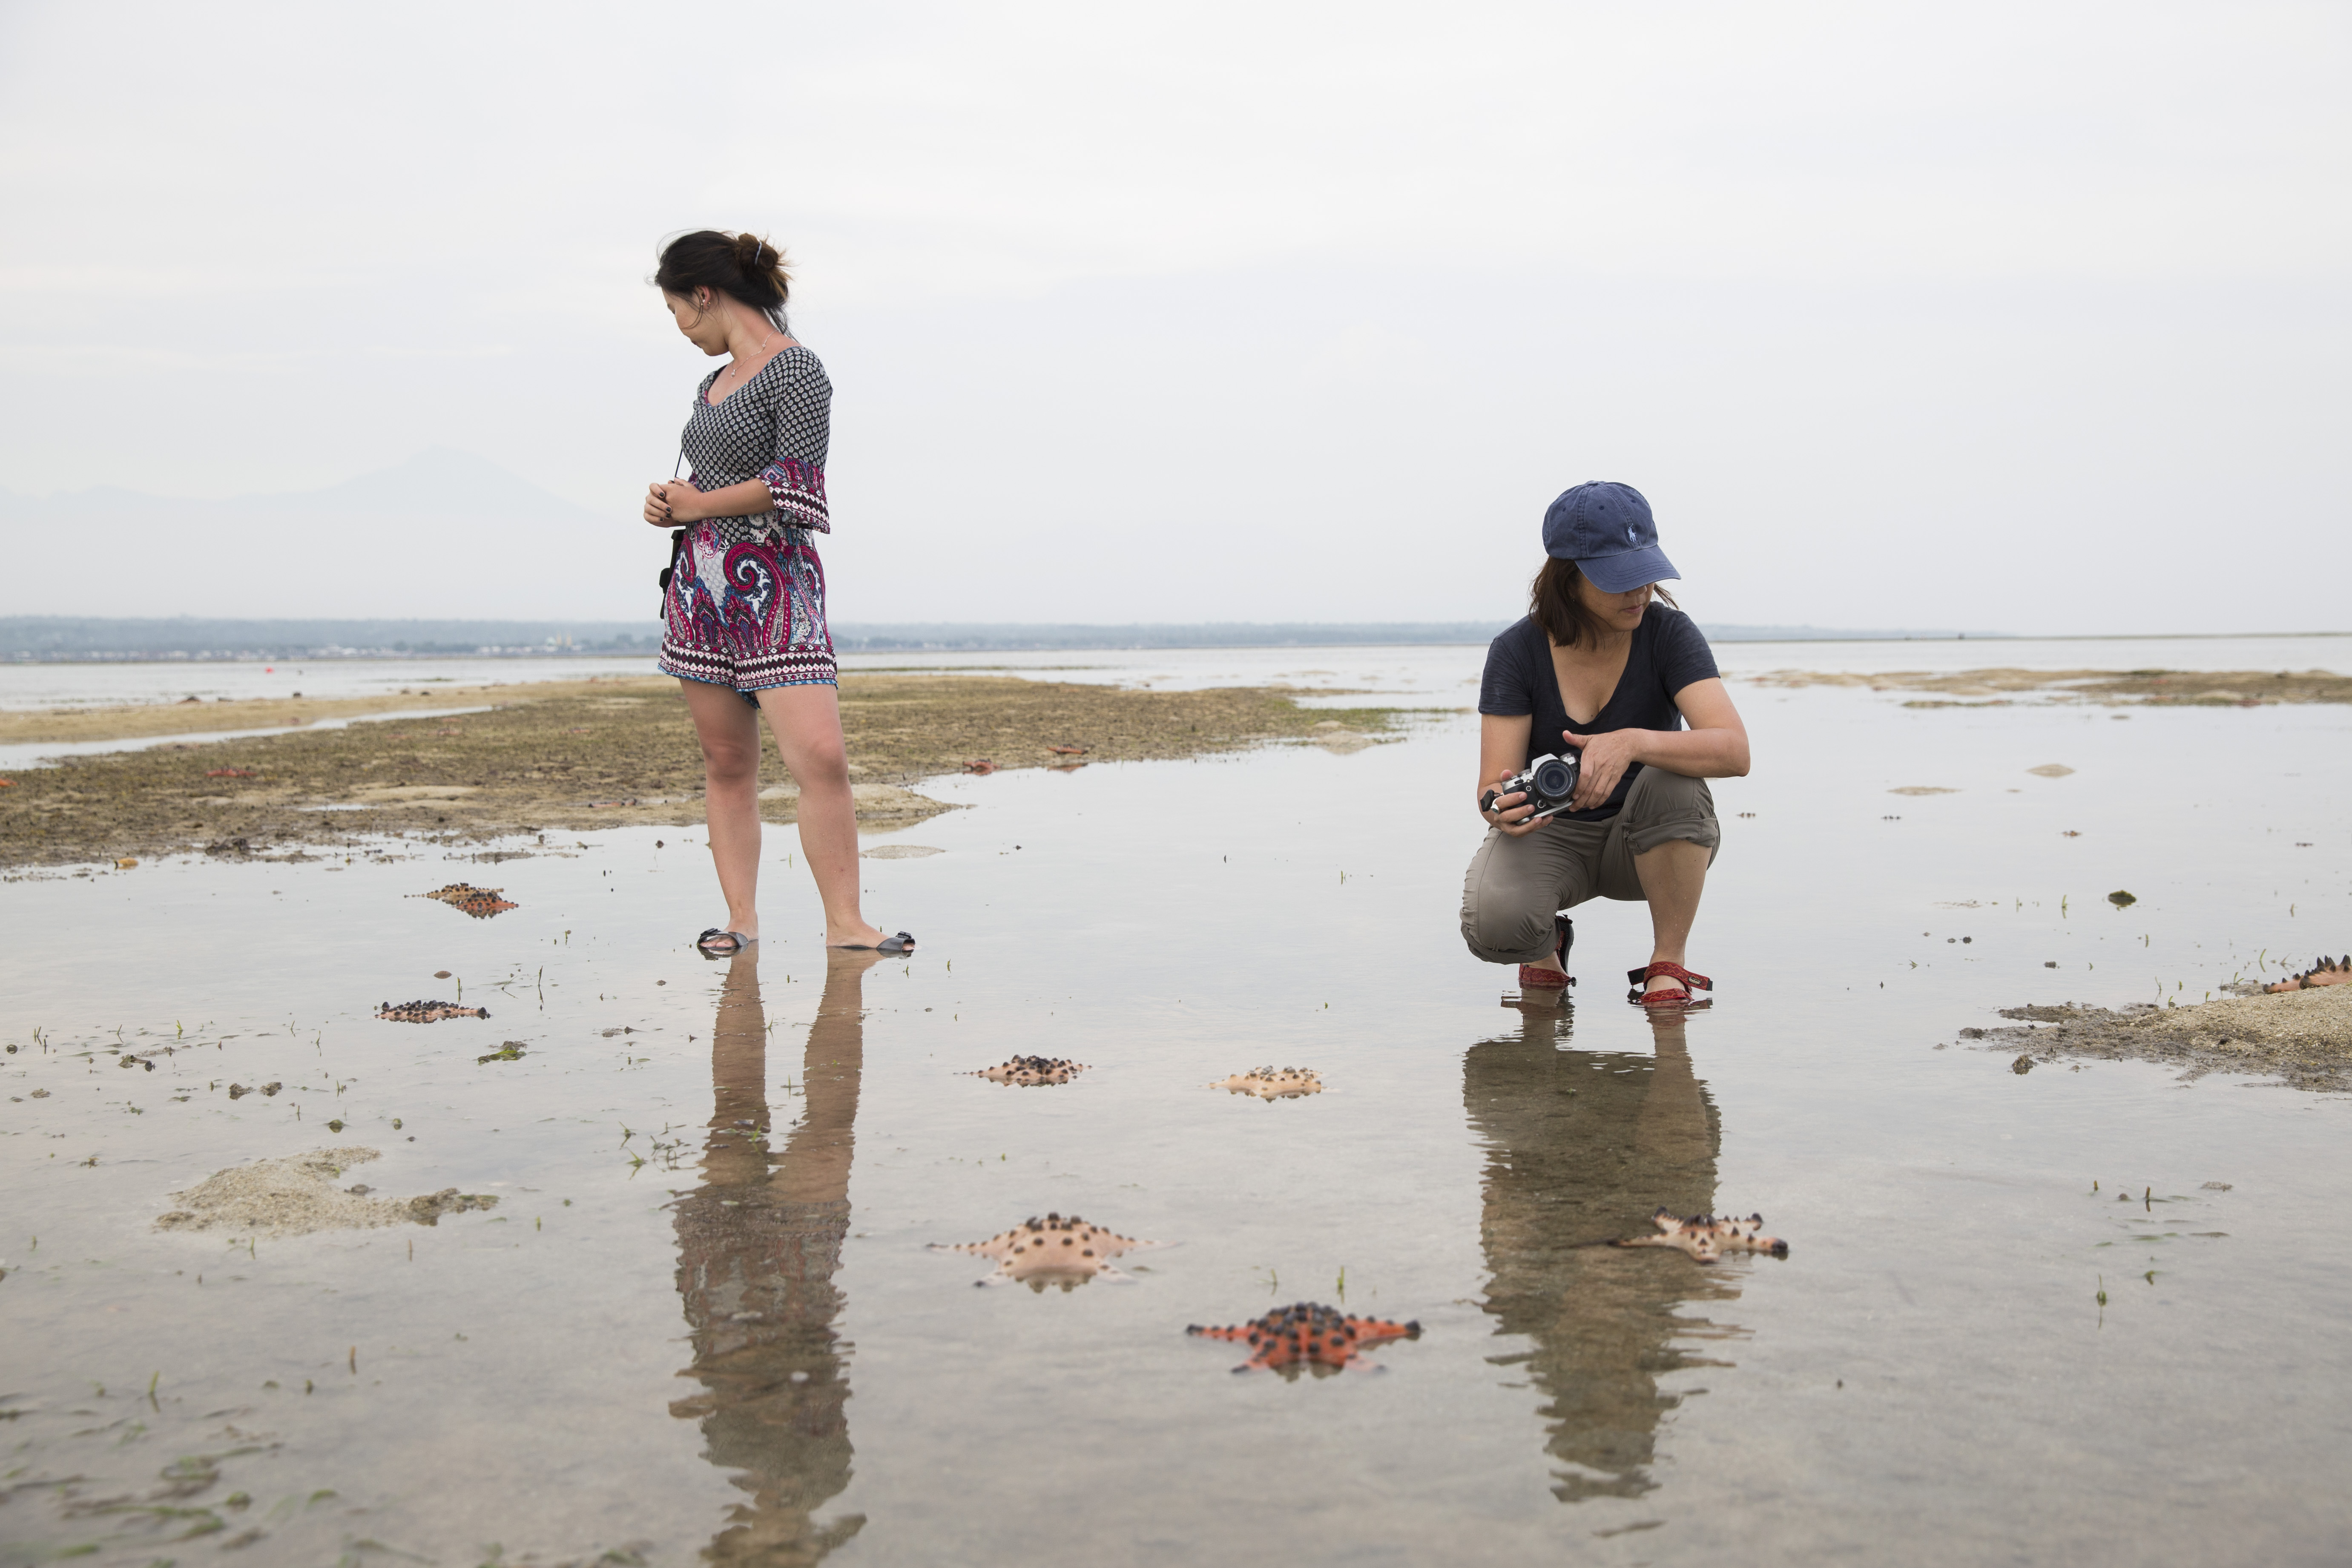 Get up close with sea stars and other marine life in an intertidal area.